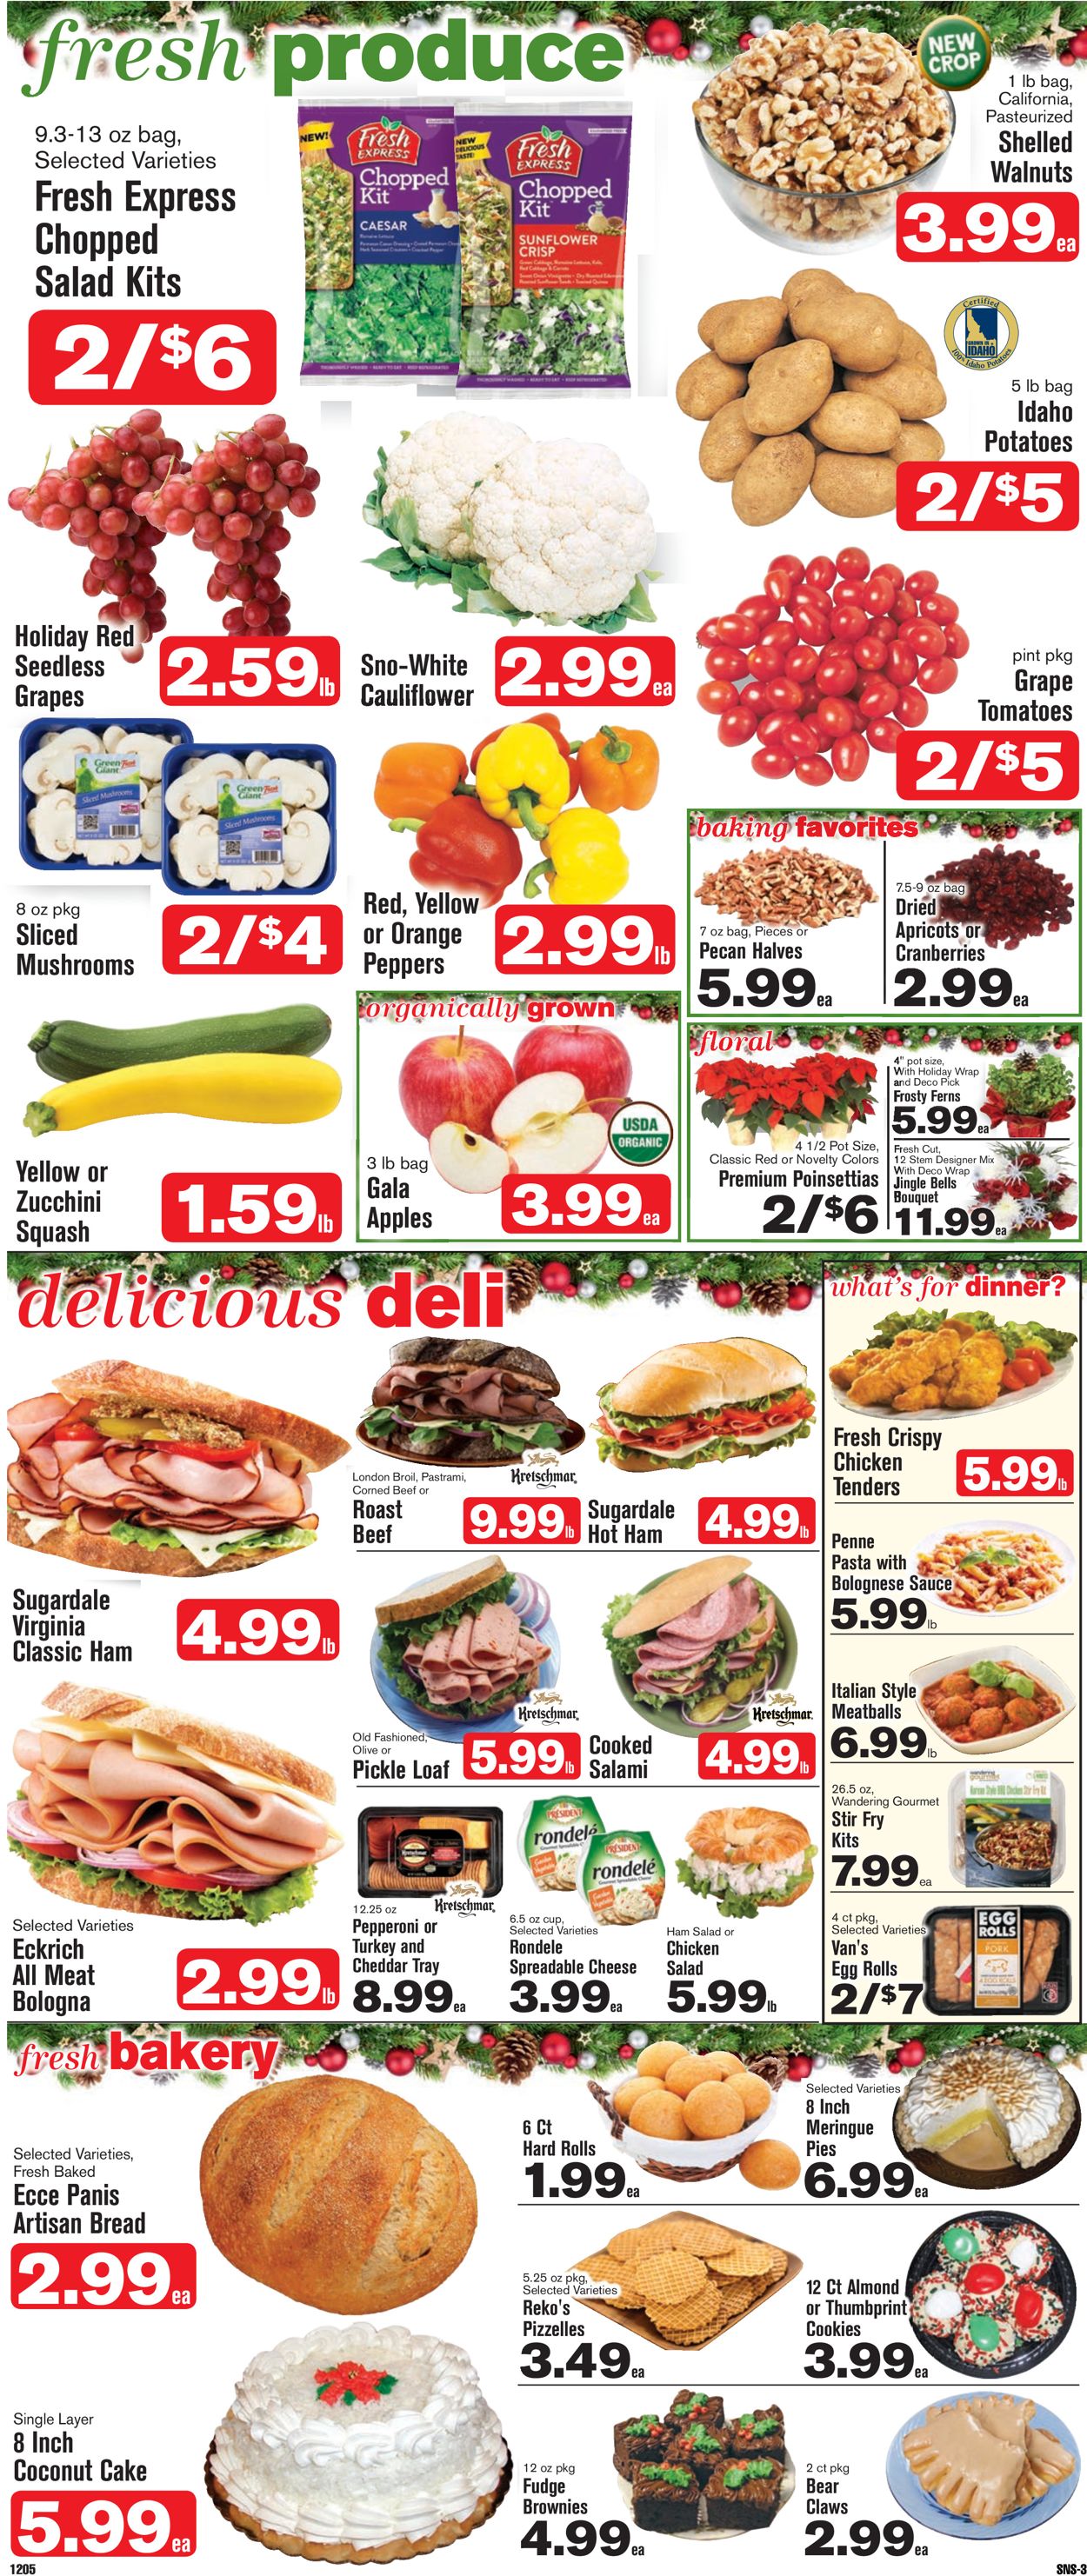 Catalogue Shop ‘n Save from 12/05/2019